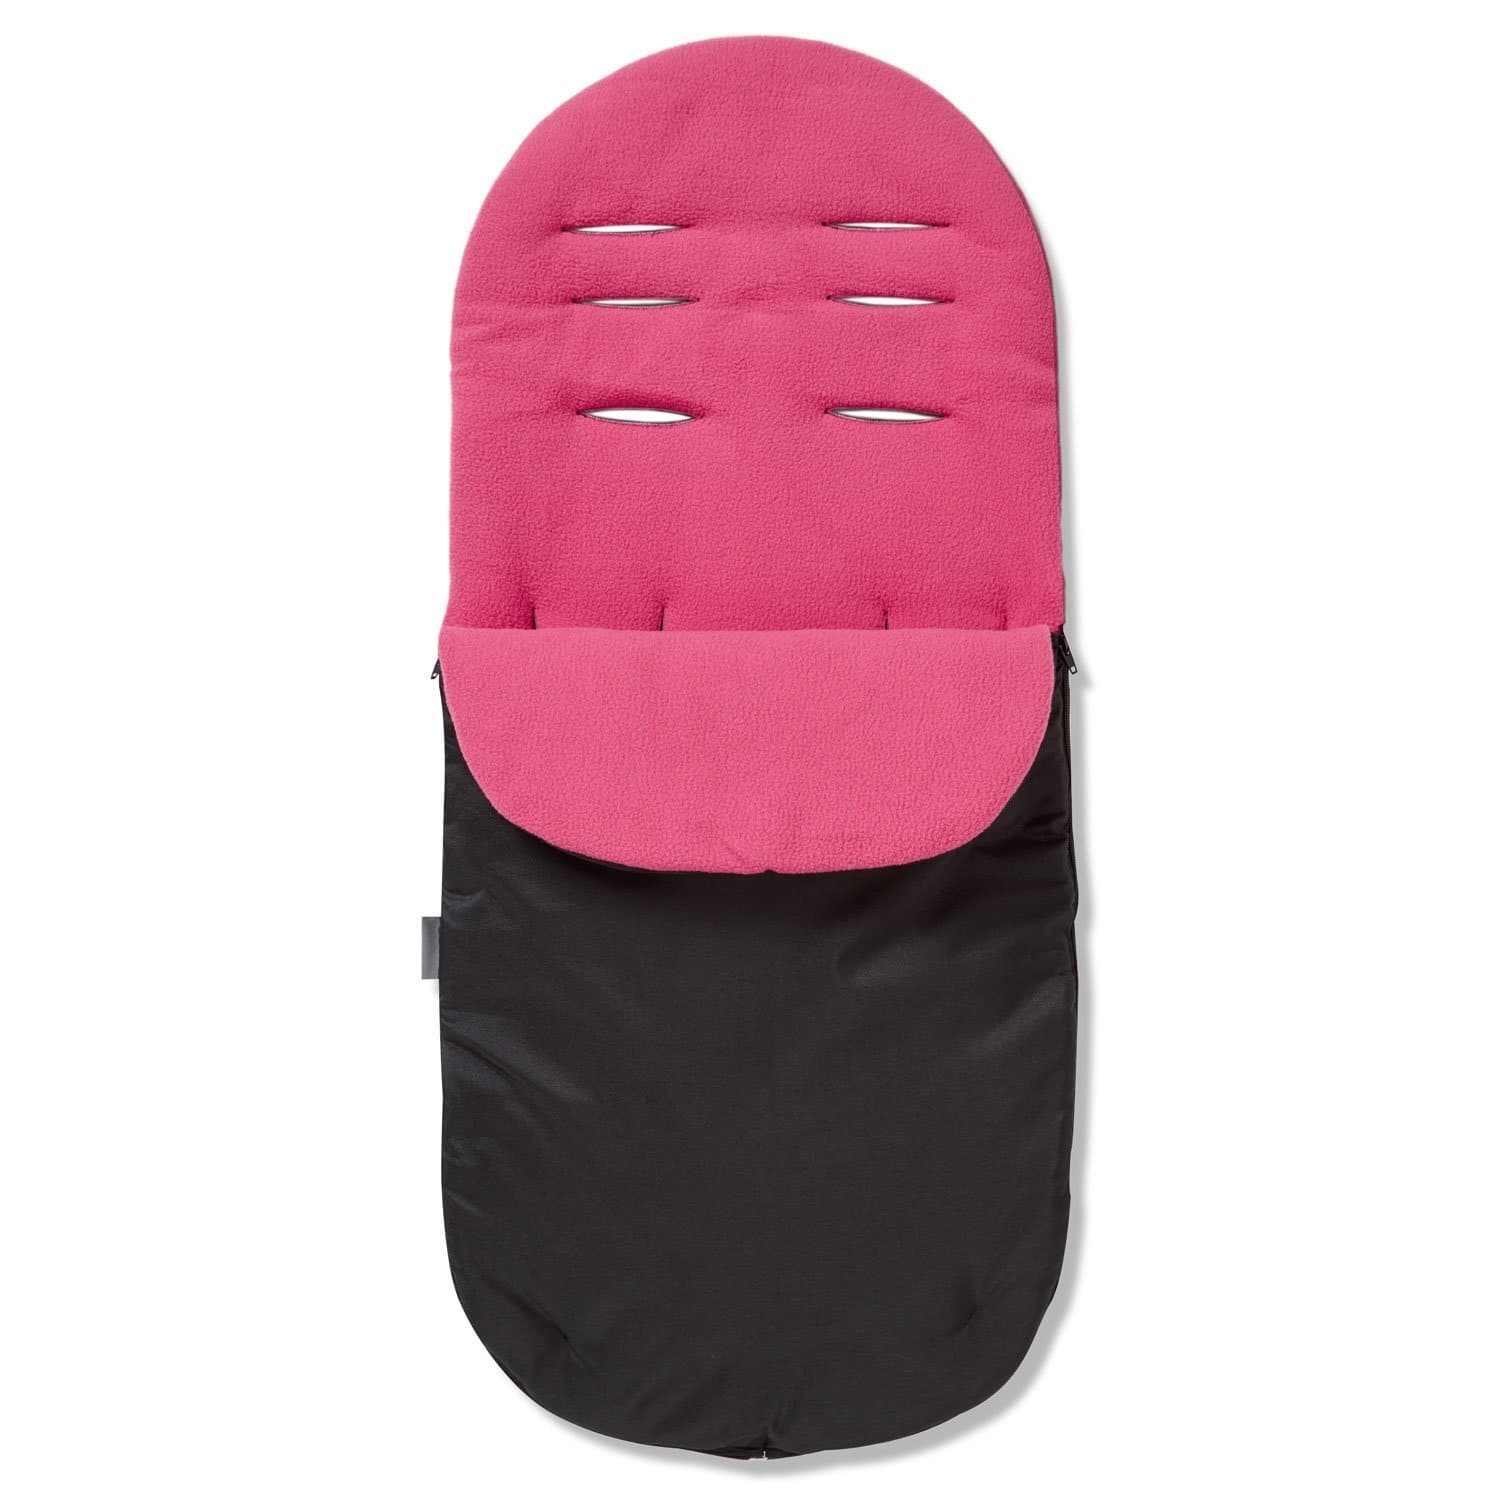 Footmuff / Cosy Toes Compatible with Babystyle - Dark Pink / Fits All Models | For Your Little One